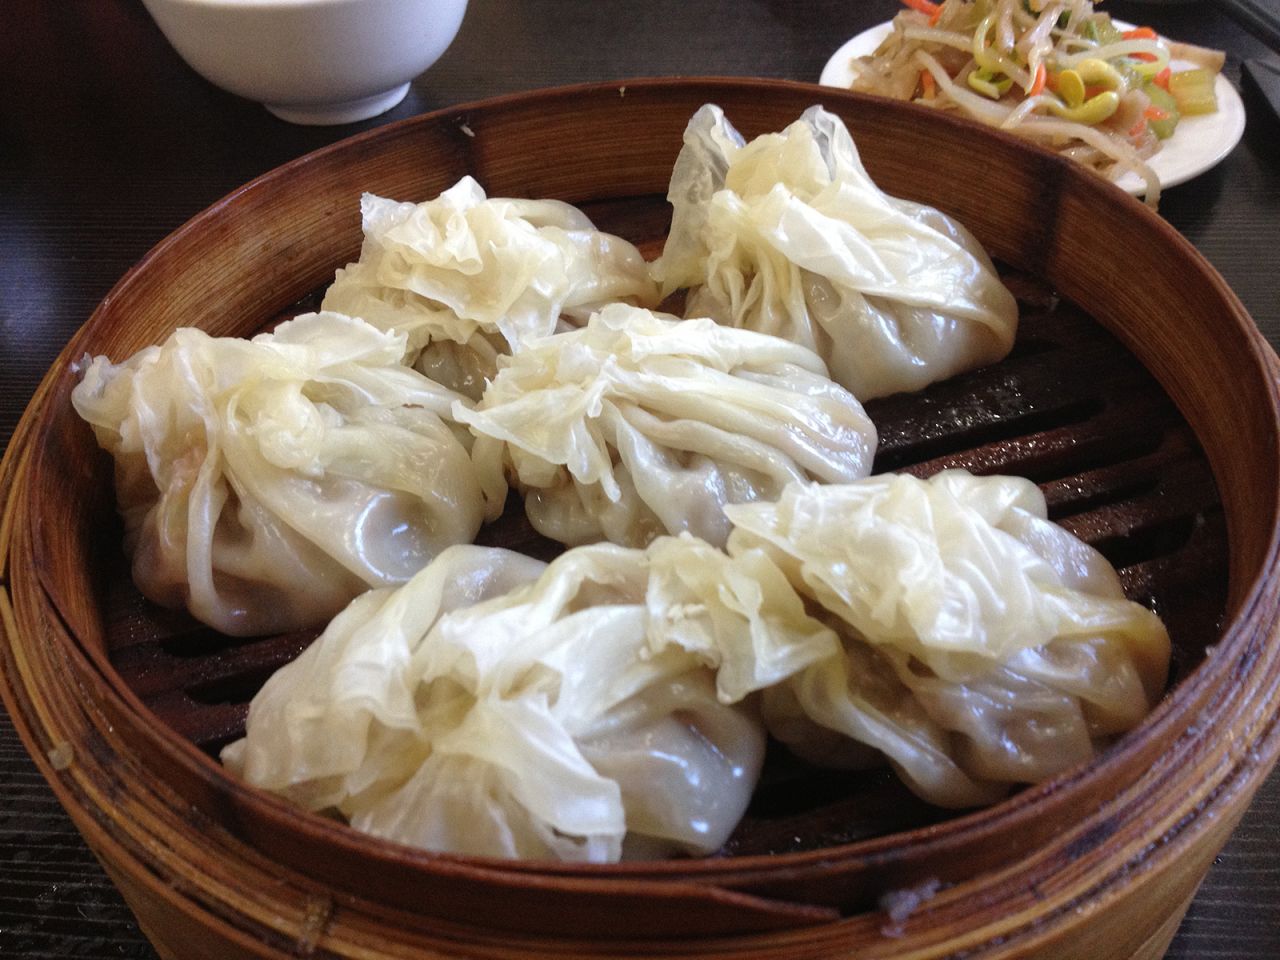 And these dumplings in Inner Mongolia.